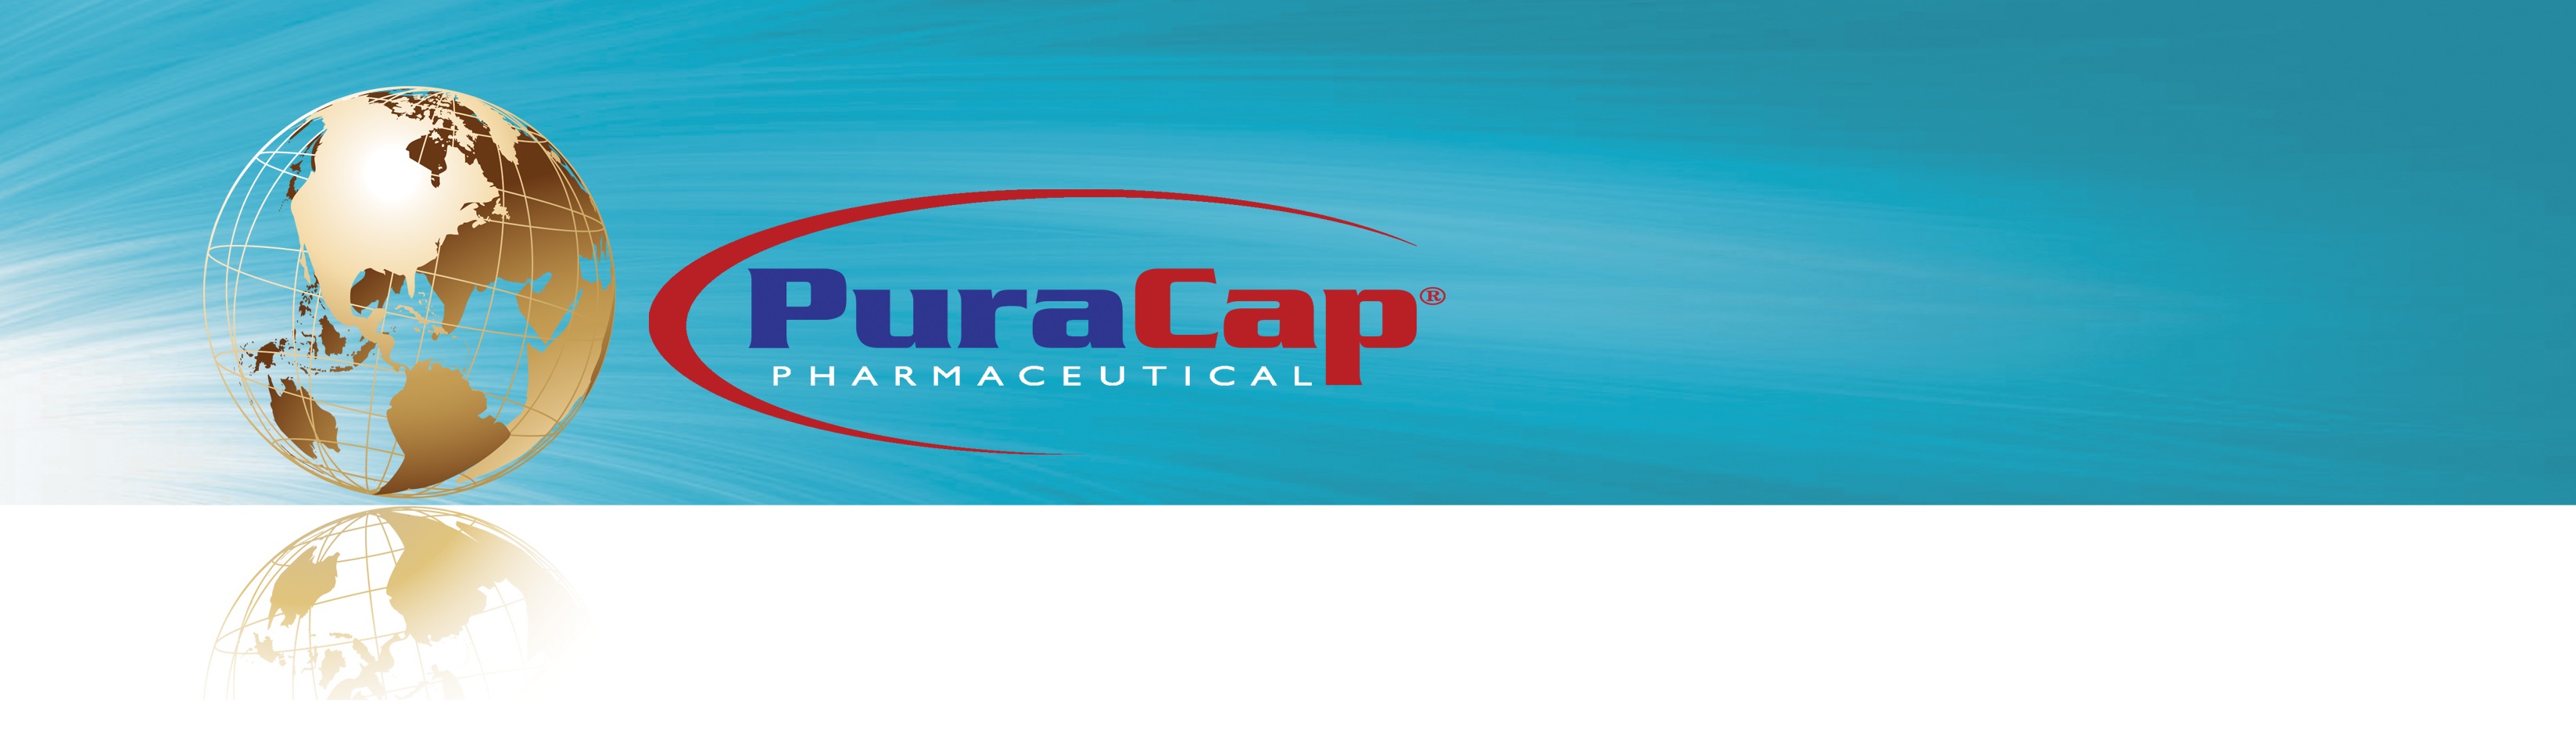 Humanwell Healthcare Group and PuraCap Pharmaceutical to acquire Epic Pharma